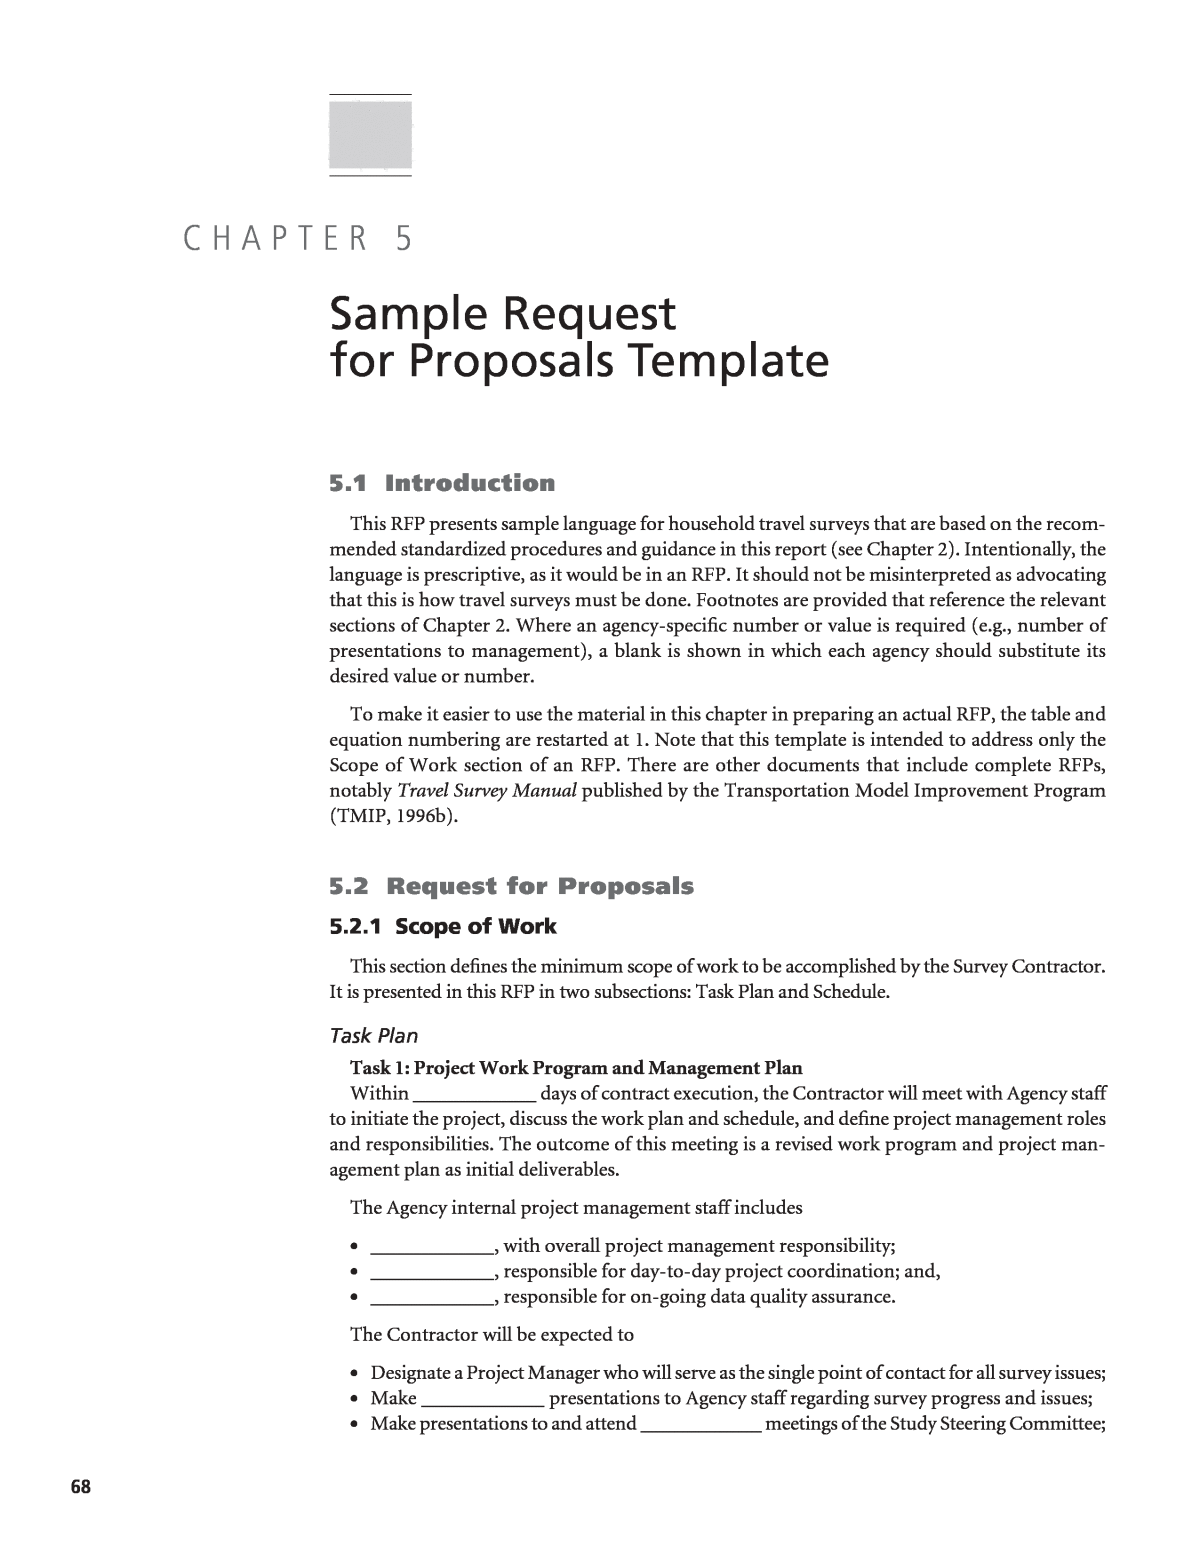 Chapter 5 Sample Request For Proposals Template Standardized Procedures For Personal Travel Surveys The National Academies Press